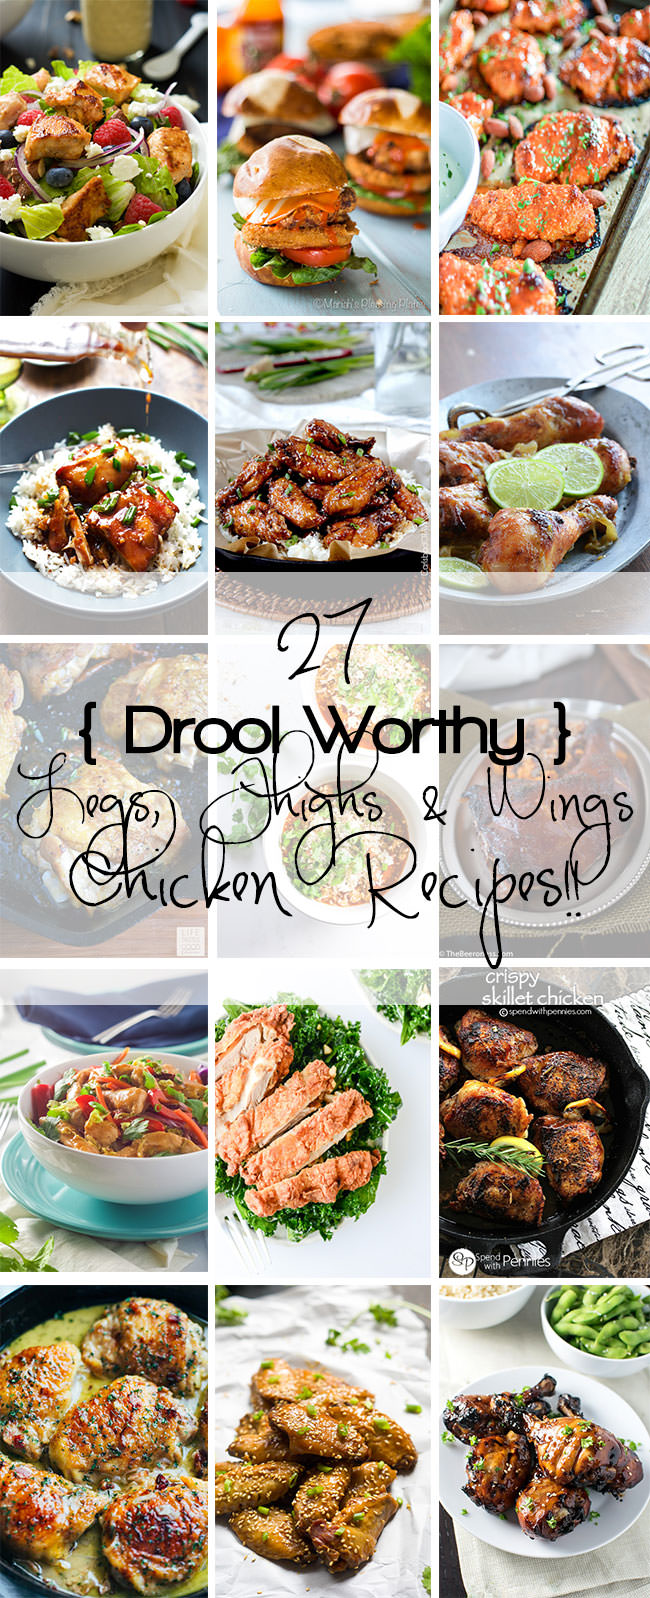 27 Legs, Thighs & Wings Chicken Recipes!